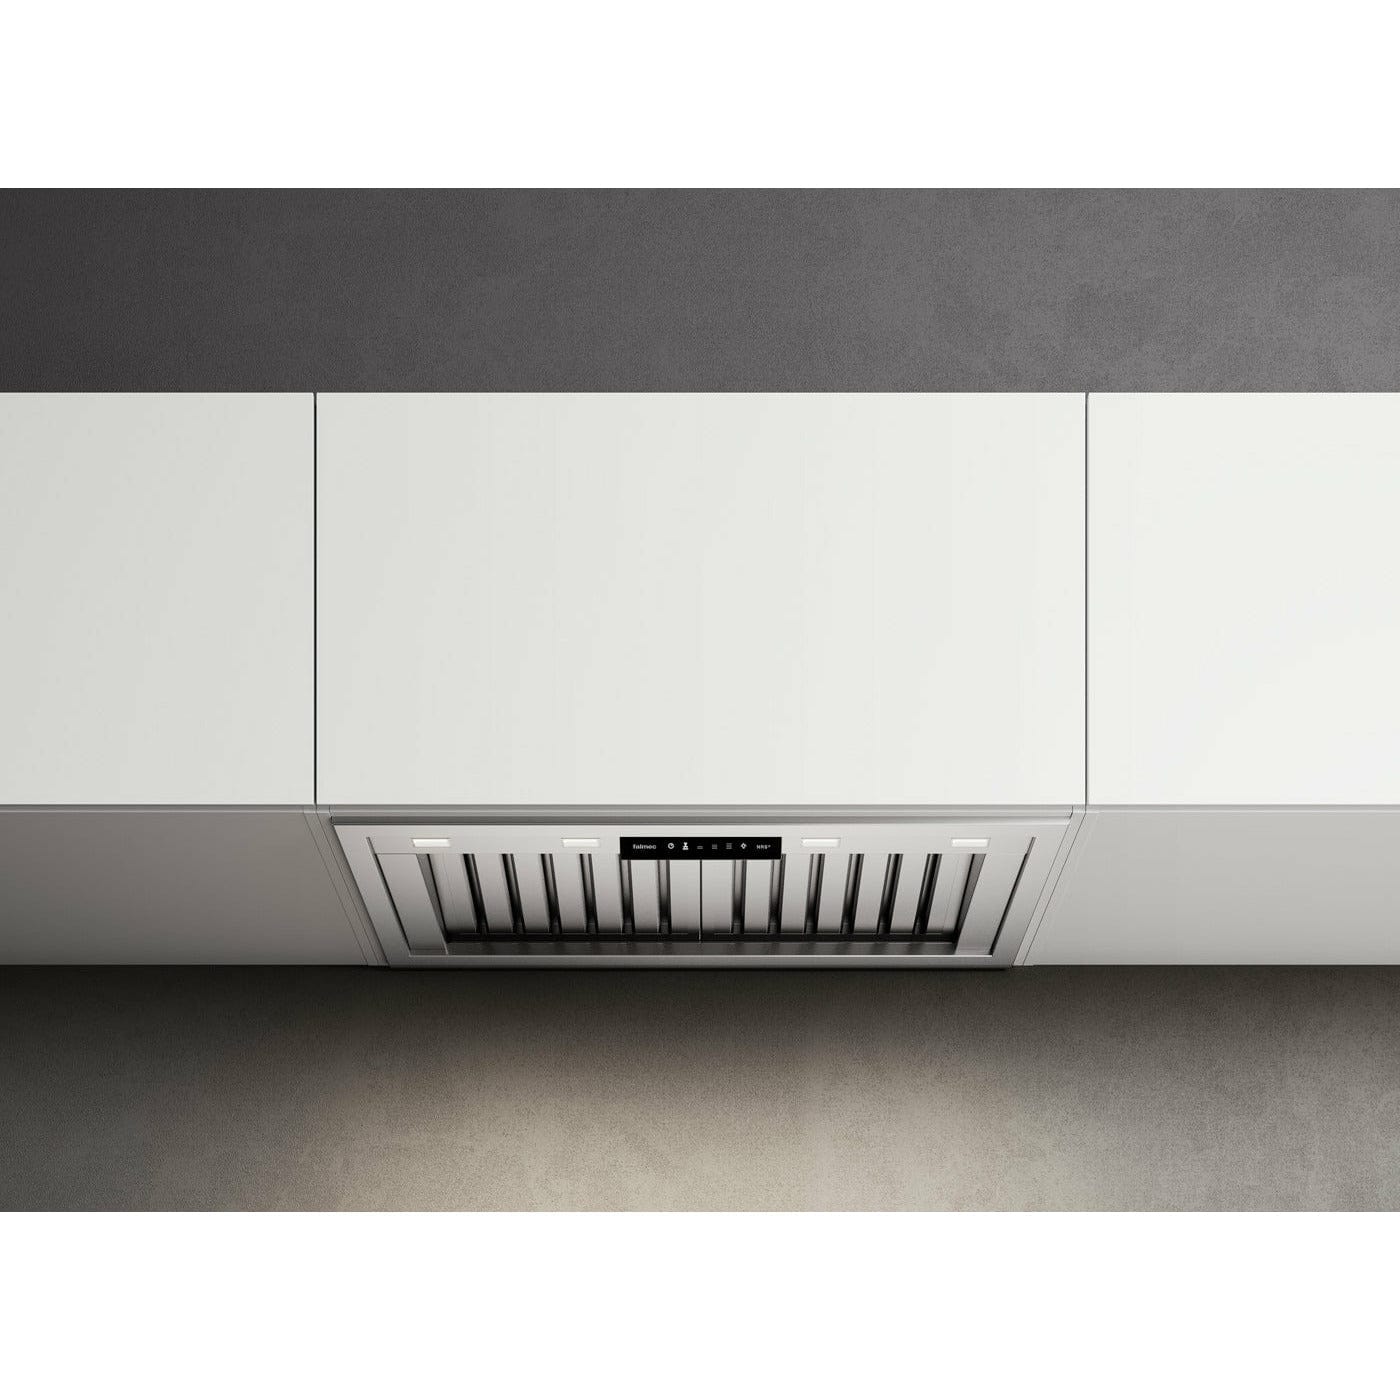 Falmec Massimo Pro NRS Insert, 600 CFM NRS technology for a quieter kitchen, Touch control + 24 h function - FNMAS3W6SS Range Hoods FNMAS30W6SS Luxury Appliances Direct